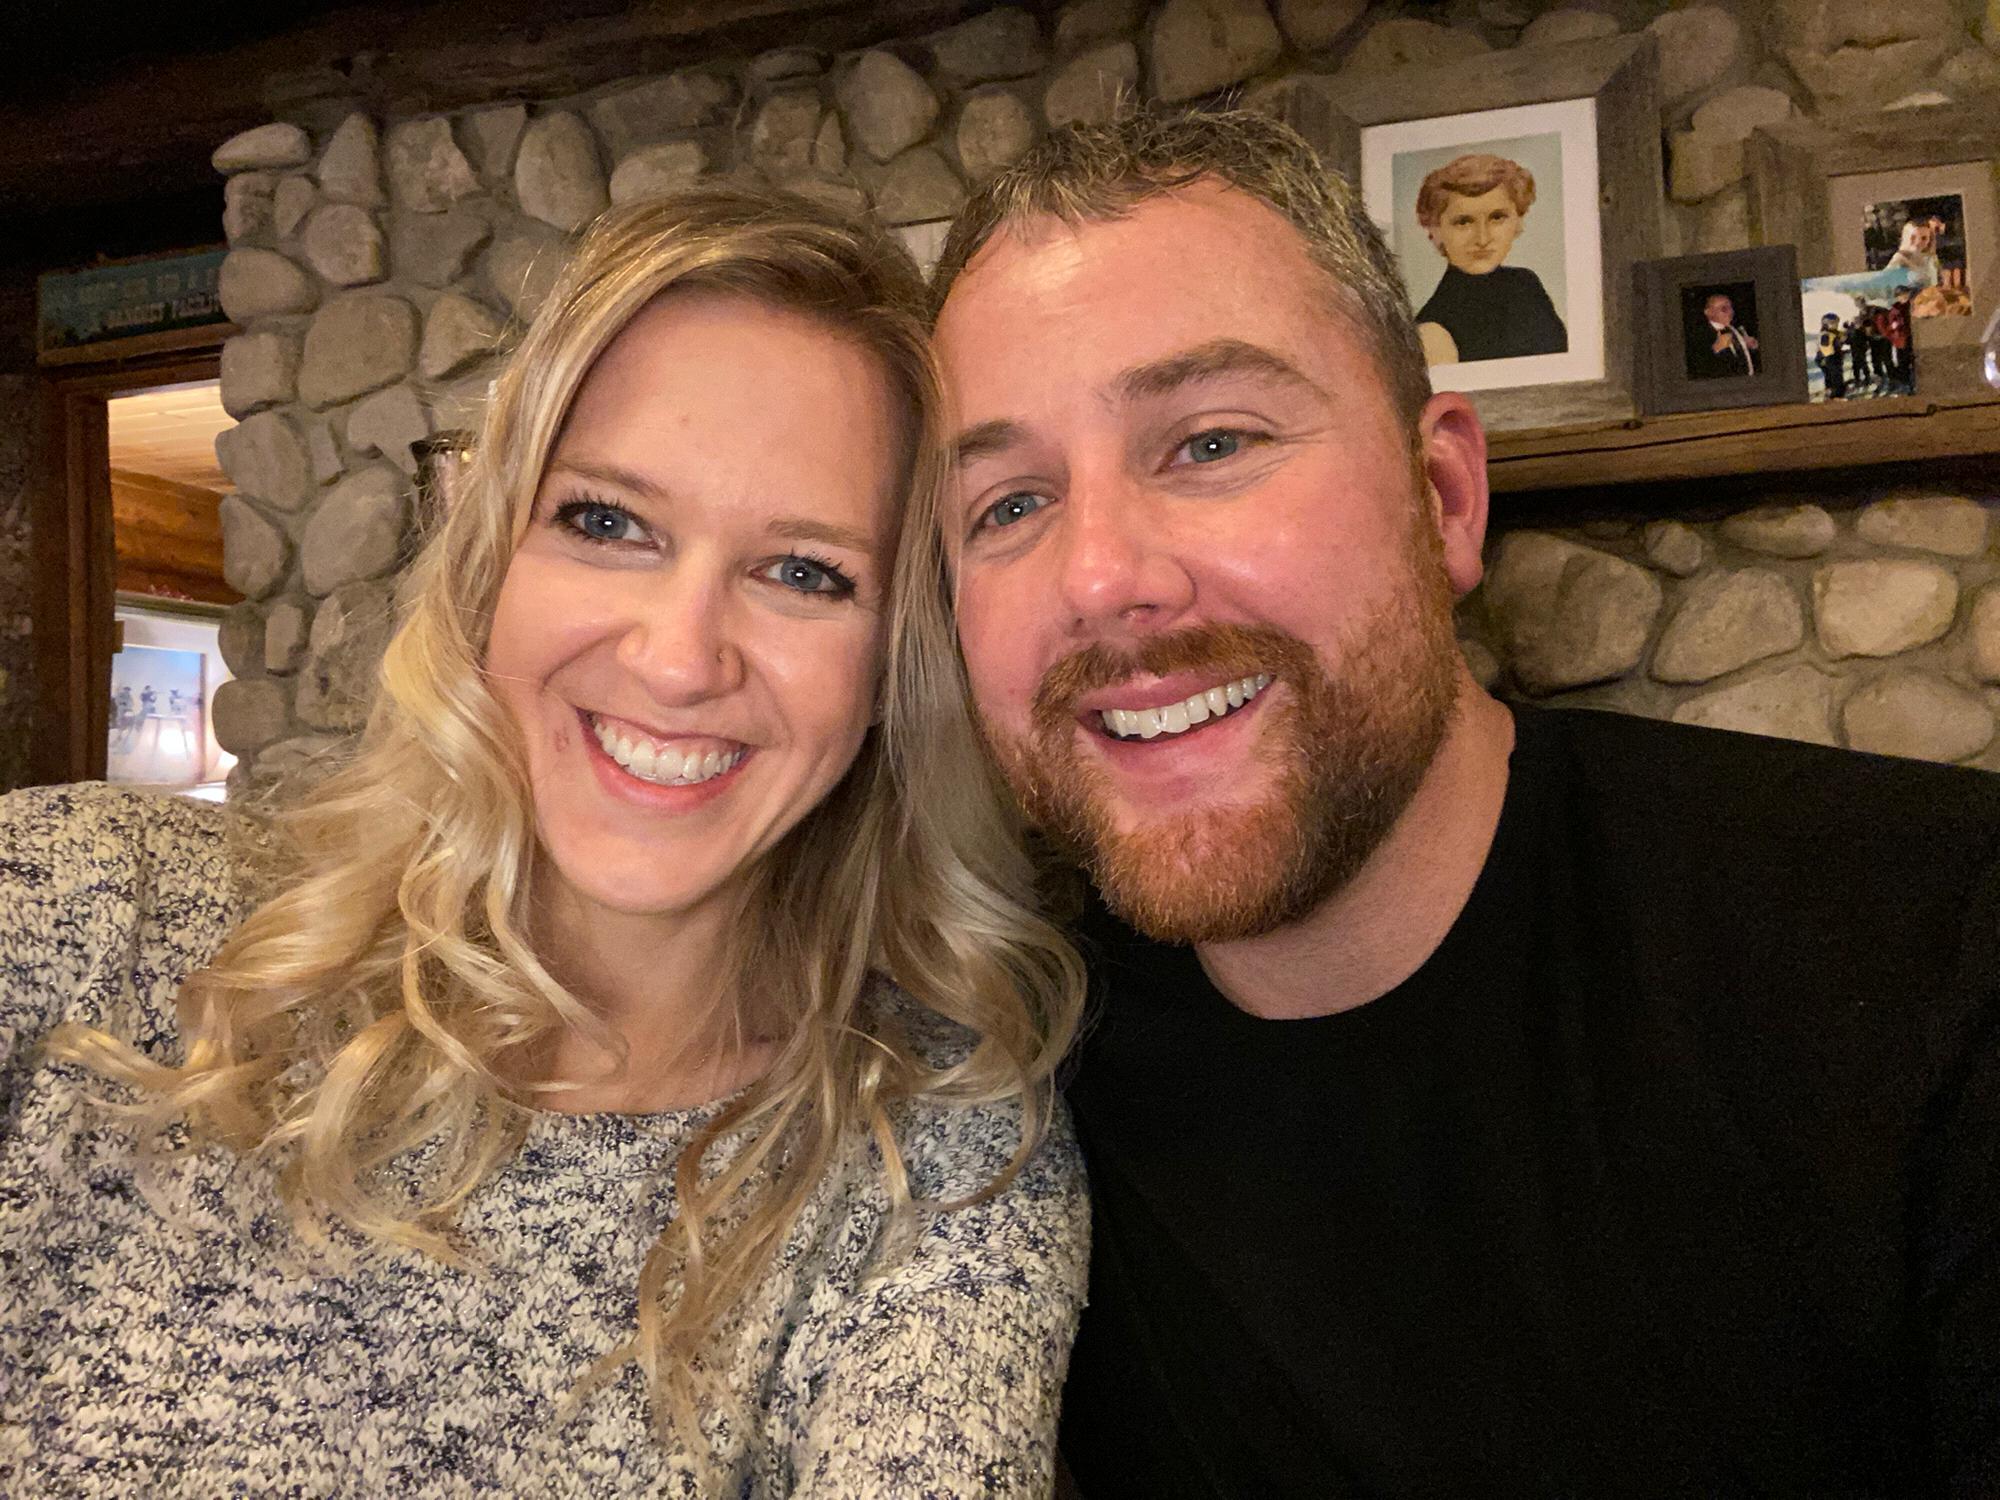 We got engaged at the Silver Fork Lodge just before Thanksgiving.